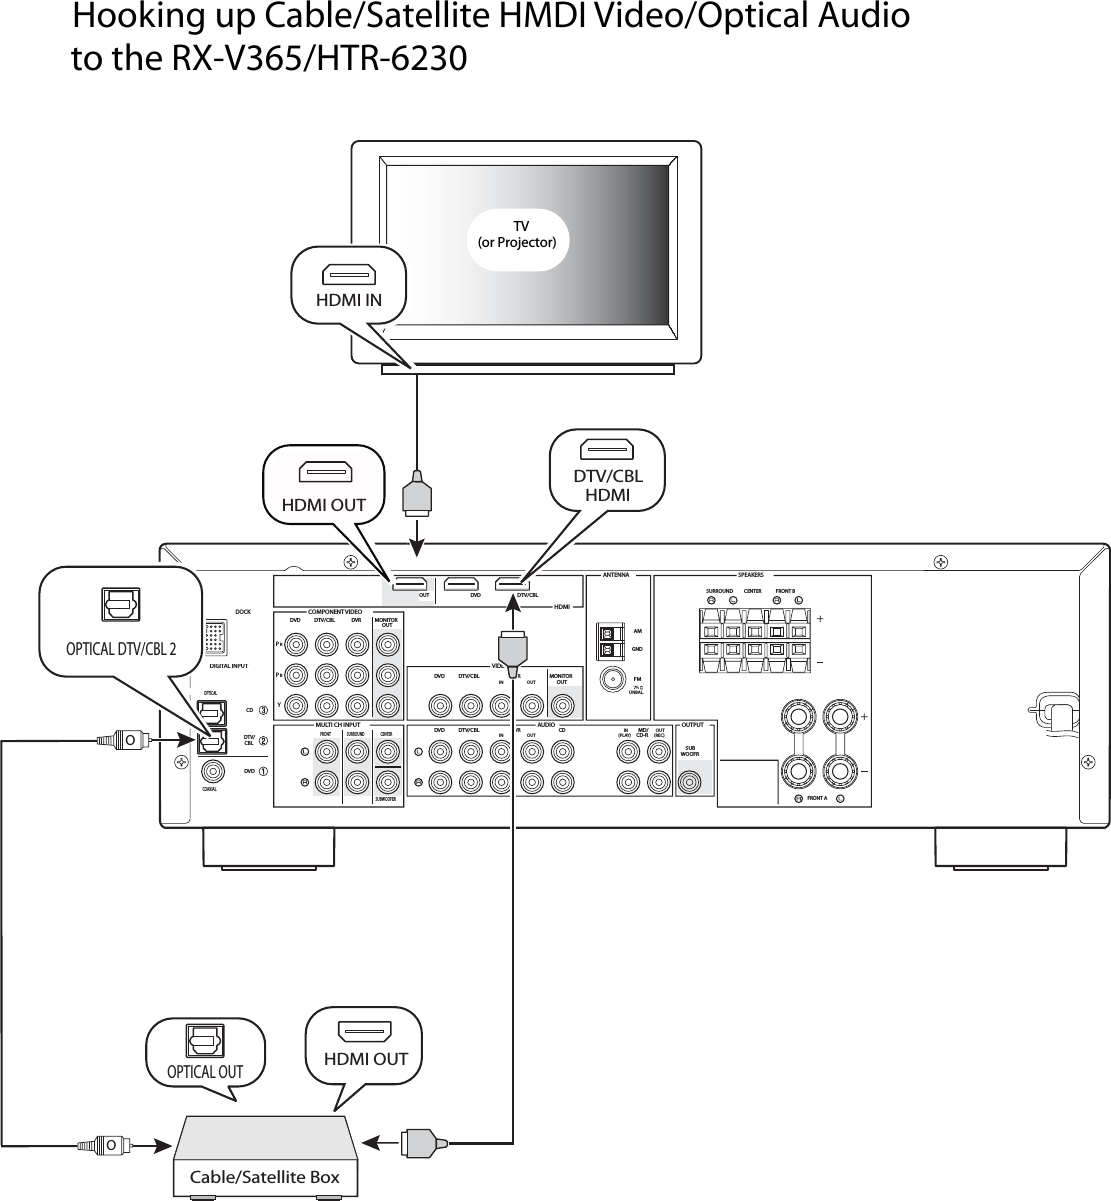 Page 1 of 1 - Yamaha RX-V365 HDMI To Cable/Satellite Box Hook-up Diagram Hookup Cable Satellite